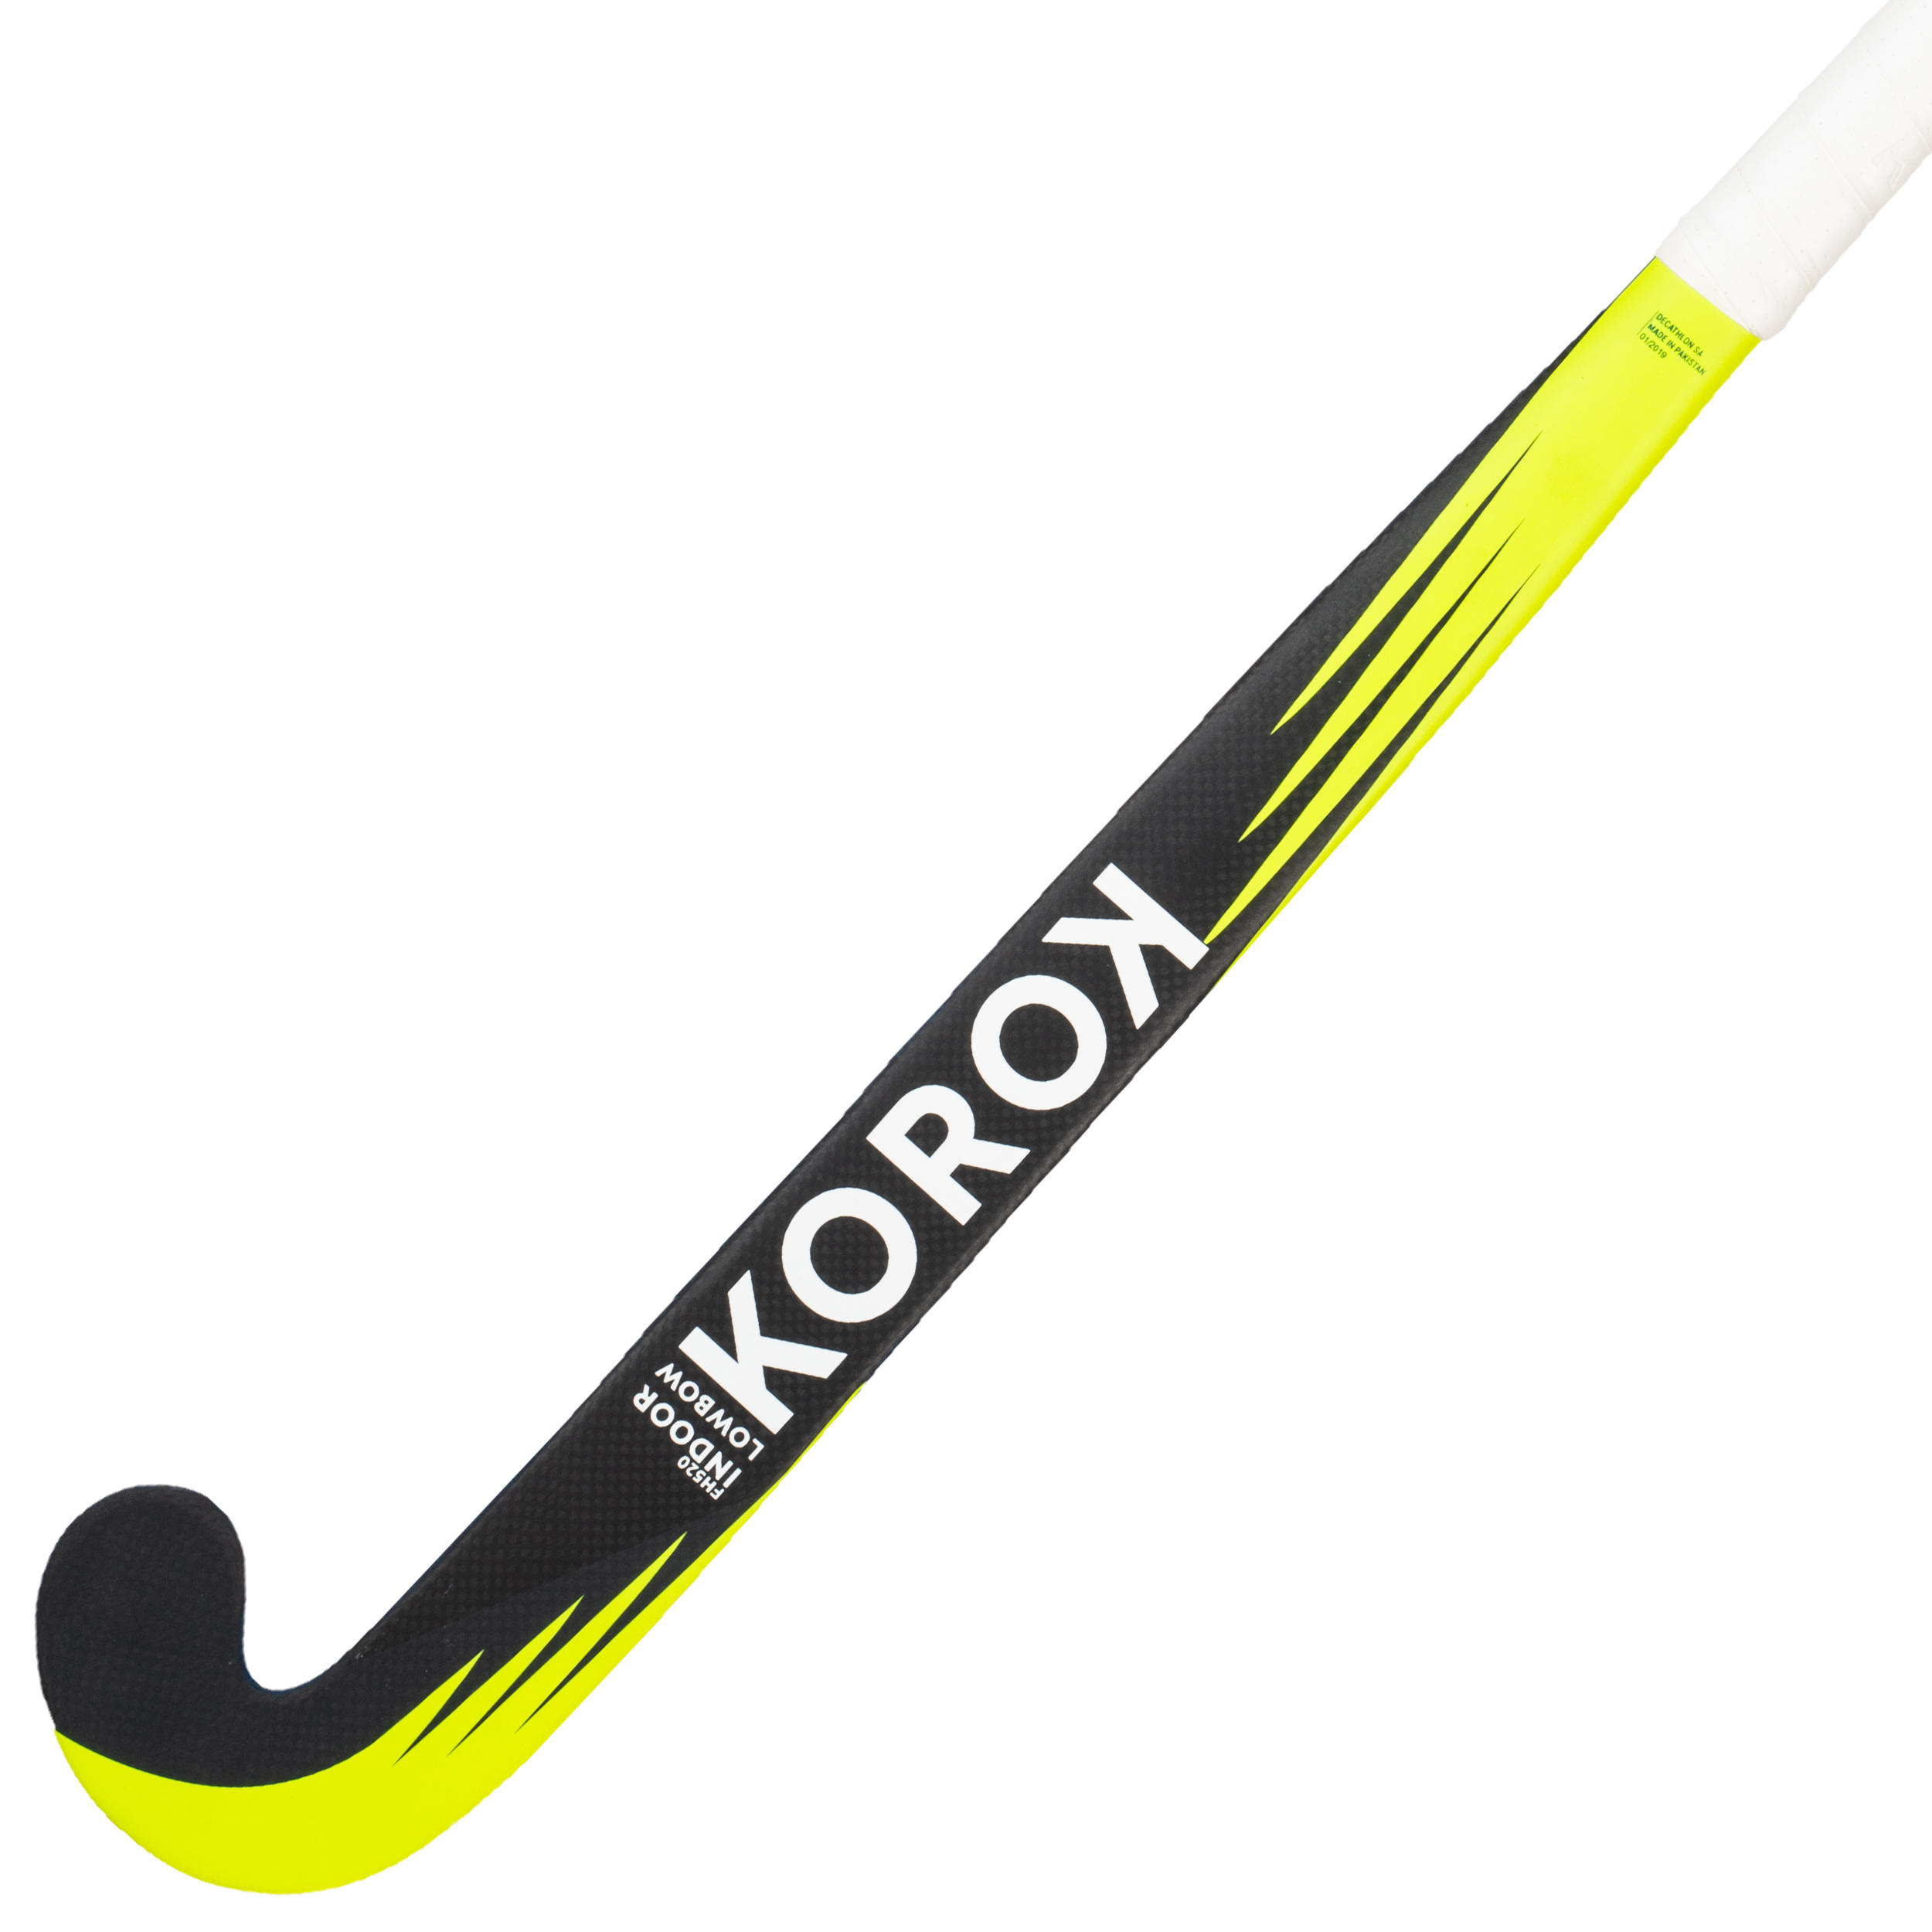 Adult Intermediate 20% Carbon Low Bow Indoor Hockey Stick FH520 - Blue/Yellow 7/10